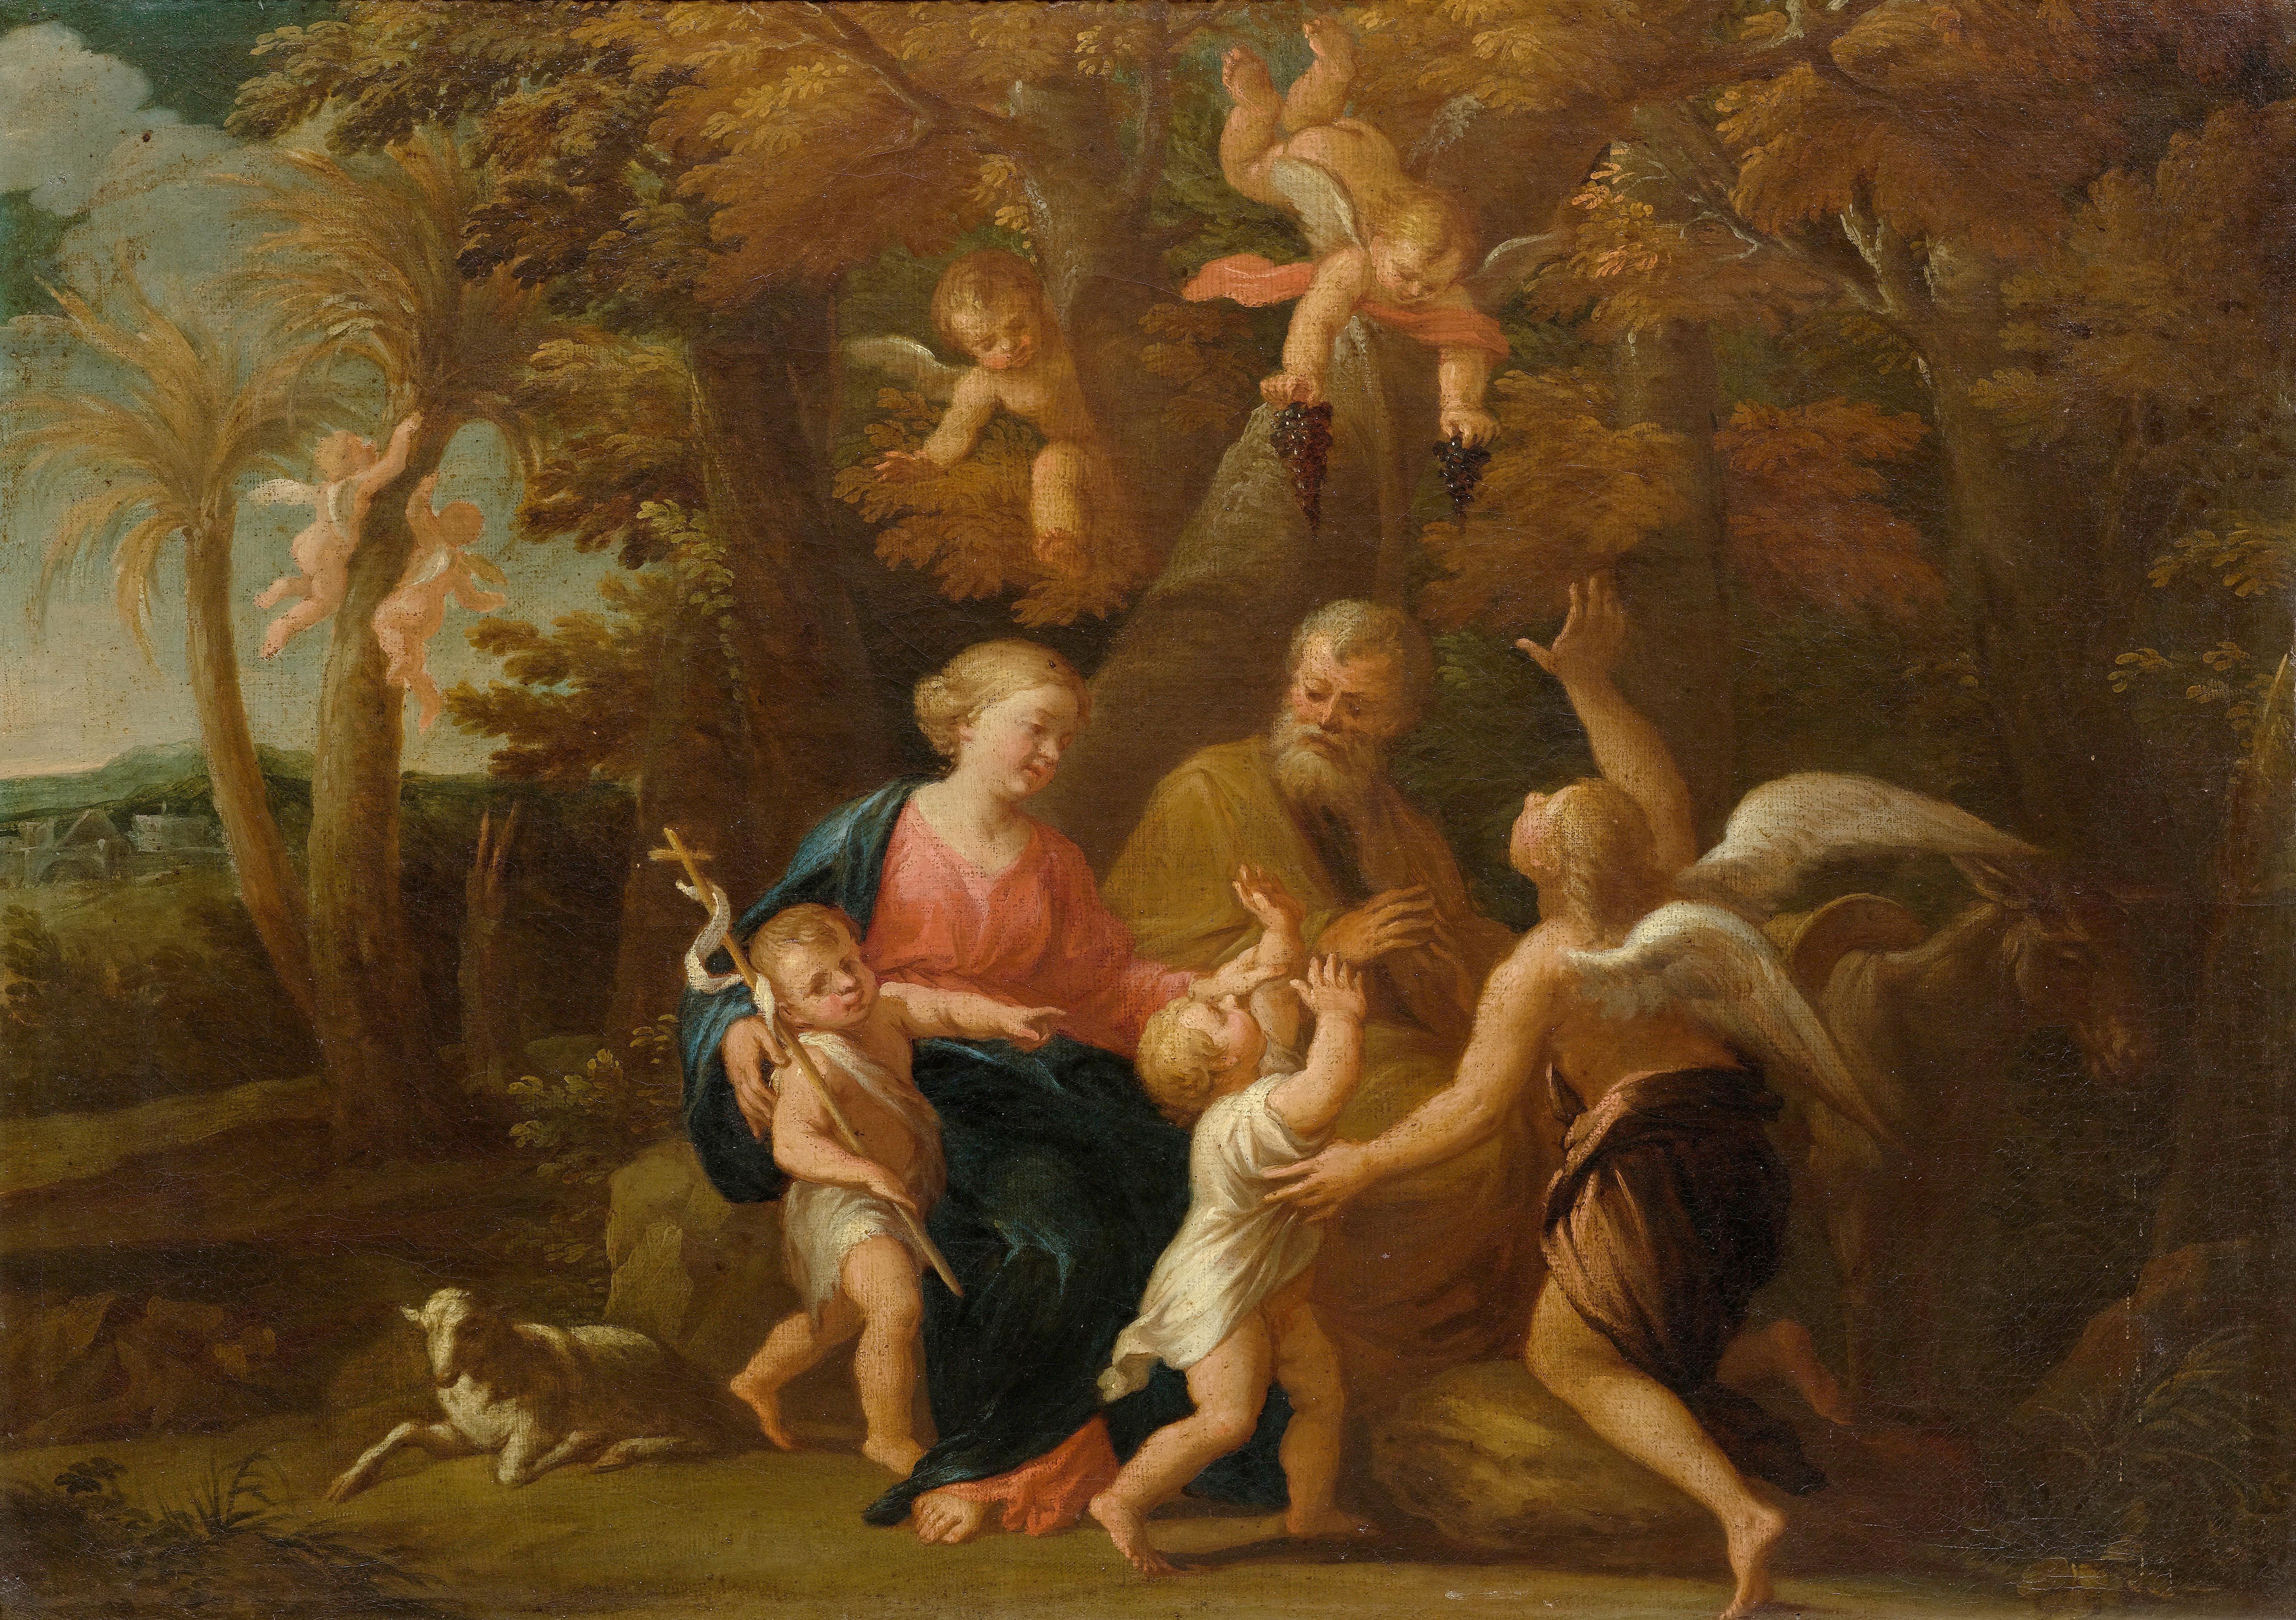 The Holy Family with John the Baptist and putti in a landscape by Nicolas Poussin